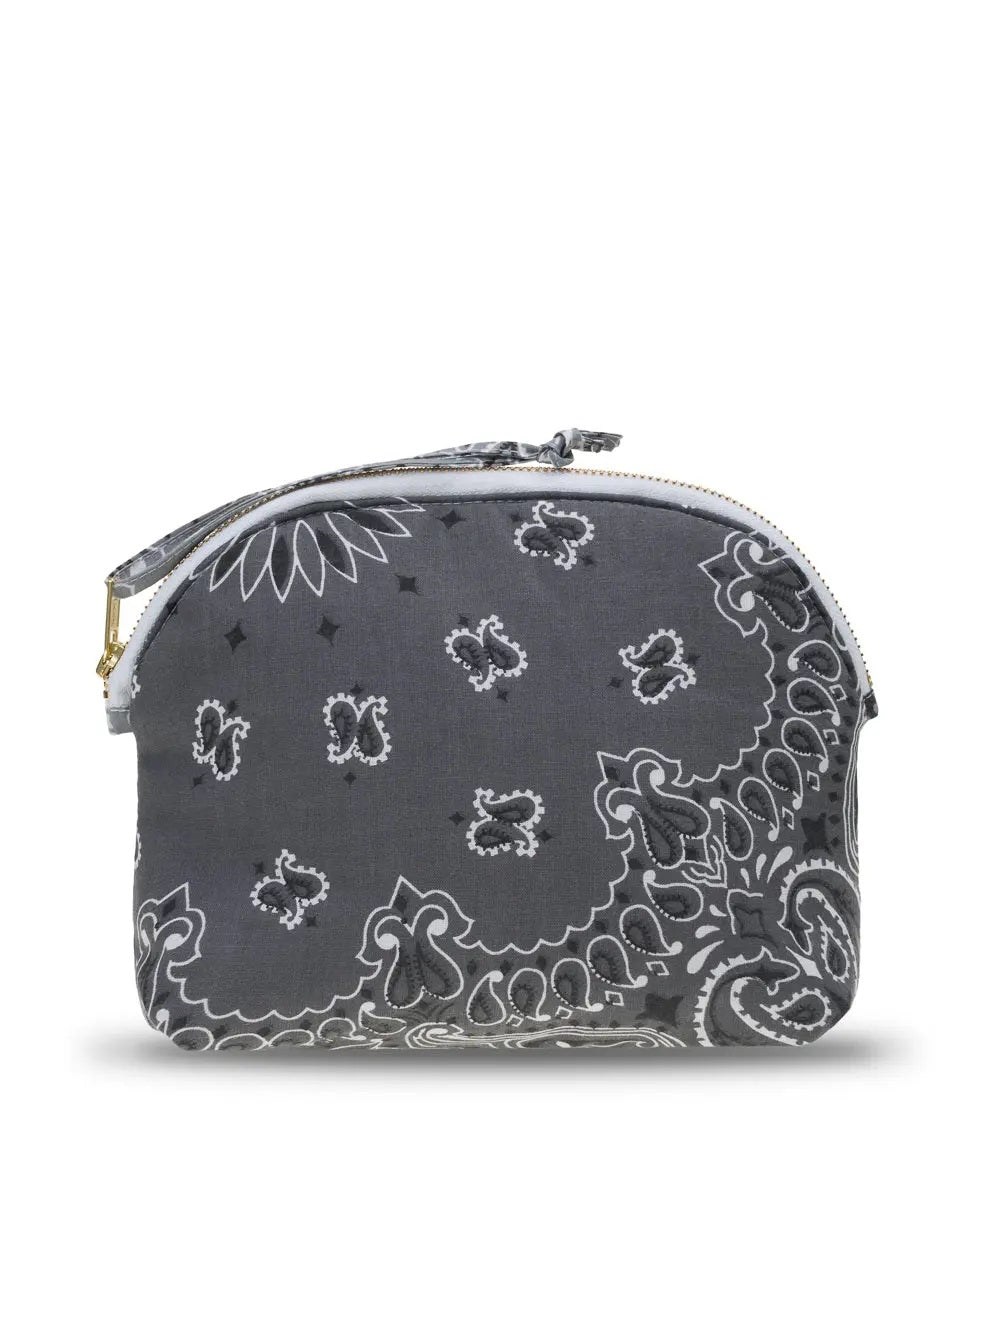 Call It By Your Name Small Vanity Pouch Heart - Dark Grey / Pale Grey